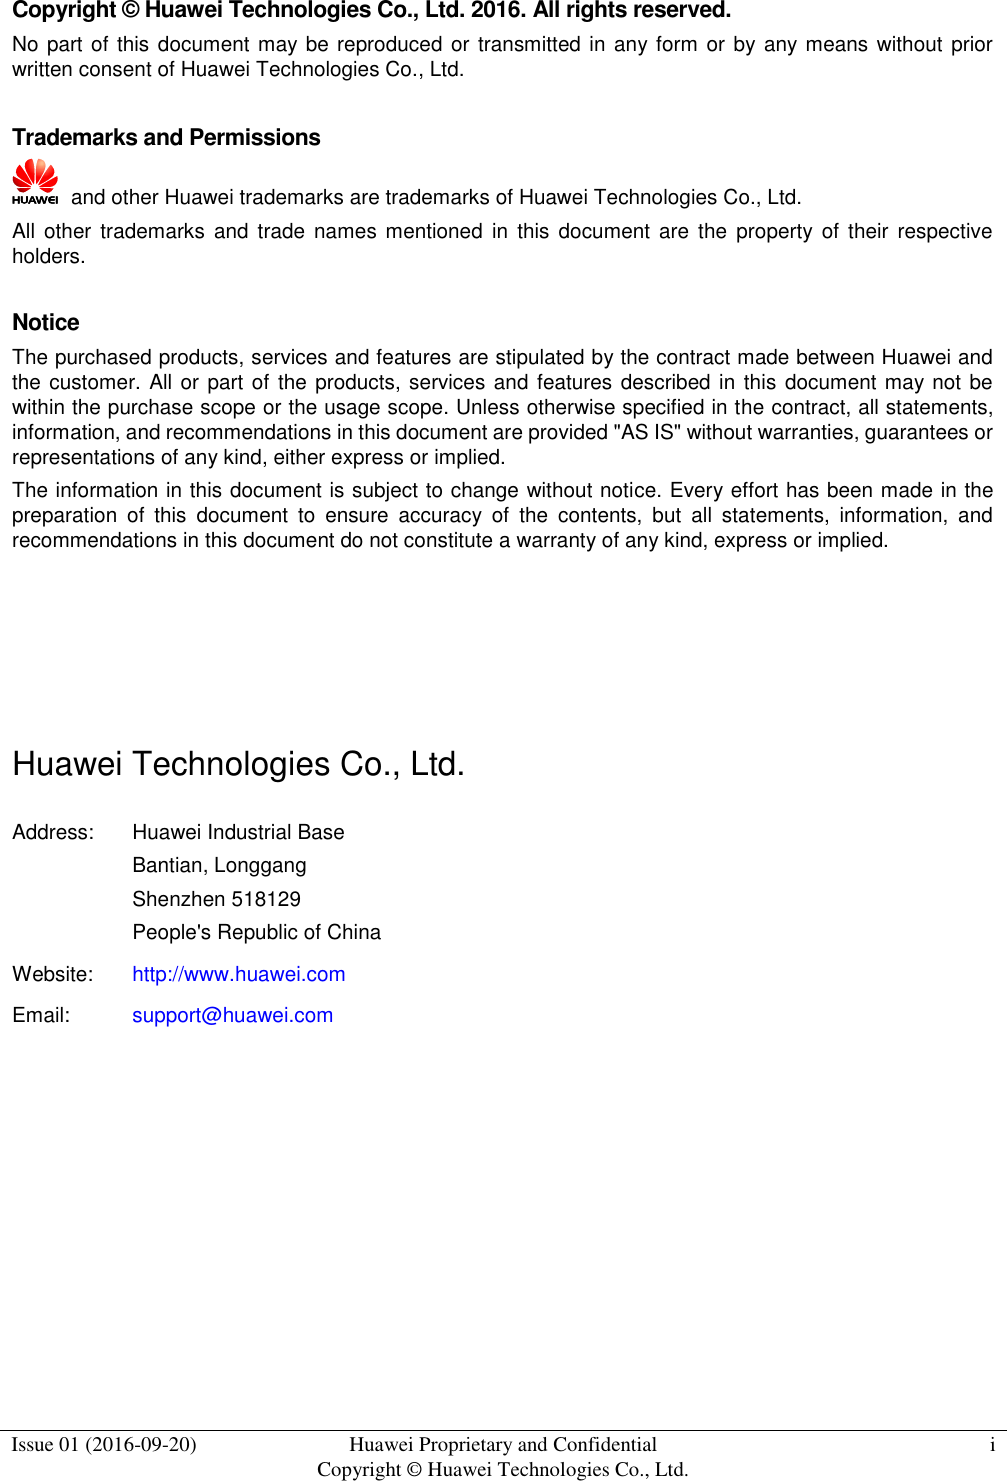  Issue 01 (2016-09-20) Huawei Proprietary and Confidential                                     Copyright © Huawei Technologies Co., Ltd. i    Copyright © Huawei Technologies Co., Ltd. 2016. All rights reserved. No part of this document may be reproduced or transmitted in any form or by any means without prior written consent of Huawei Technologies Co., Ltd.  Trademarks and Permissions   and other Huawei trademarks are trademarks of Huawei Technologies Co., Ltd. All other  trademarks  and  trade  names  mentioned  in  this  document are  the  property of  their  respective holders.  Notice The purchased products, services and features are stipulated by the contract made between Huawei and the customer.  All or part of the products, services and features described in this document may not be within the purchase scope or the usage scope. Unless otherwise specified in the contract, all statements, information, and recommendations in this document are provided &quot;AS IS&quot; without warranties, guarantees or representations of any kind, either express or implied. The information in this document is subject to change without notice. Every effort has been made in the preparation  of  this  document  to  ensure  accuracy  of  the  contents,  but  all  statements,  information,  and recommendations in this document do not constitute a warranty of any kind, express or implied.     Huawei Technologies Co., Ltd. Address: Huawei Industrial Base Bantian, Longgang Shenzhen 518129 People&apos;s Republic of China Website: http://www.huawei.com Email: support@huawei.com          